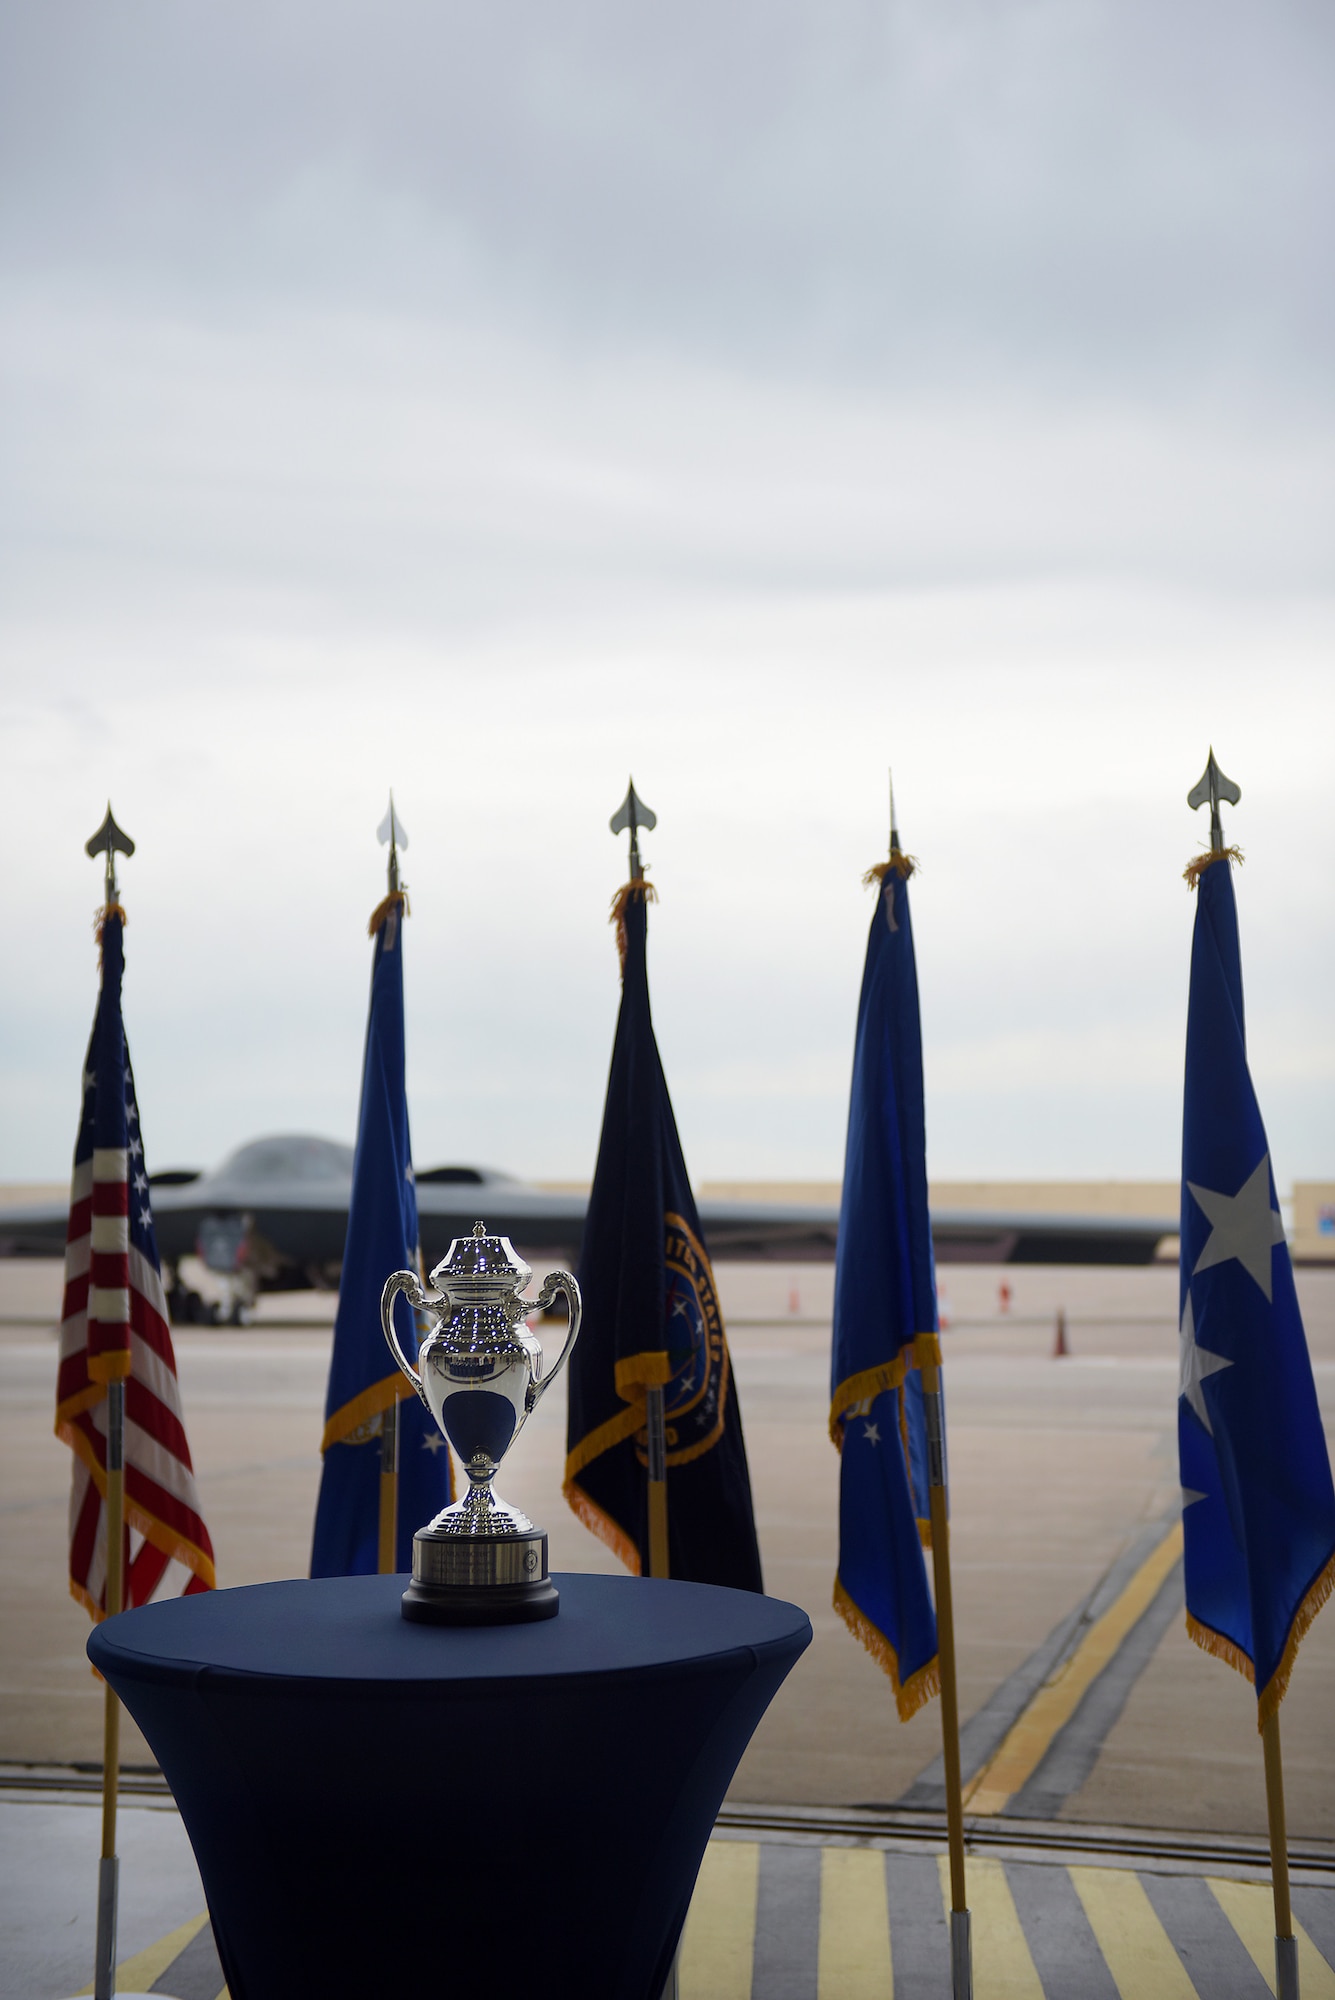 The Omaha Trophy, is displayed at Whiteman Air Force Base, Mo., May 8, 2018. The Omaha Trophy is awarded to units for excellence in strategic deterrence and global strike. Team Whiteman won the trophy for executing the best Strategic Bomber Operations of 2017.  (U.S. Air Force photos by Airman 1st Class Taylor Phifer)